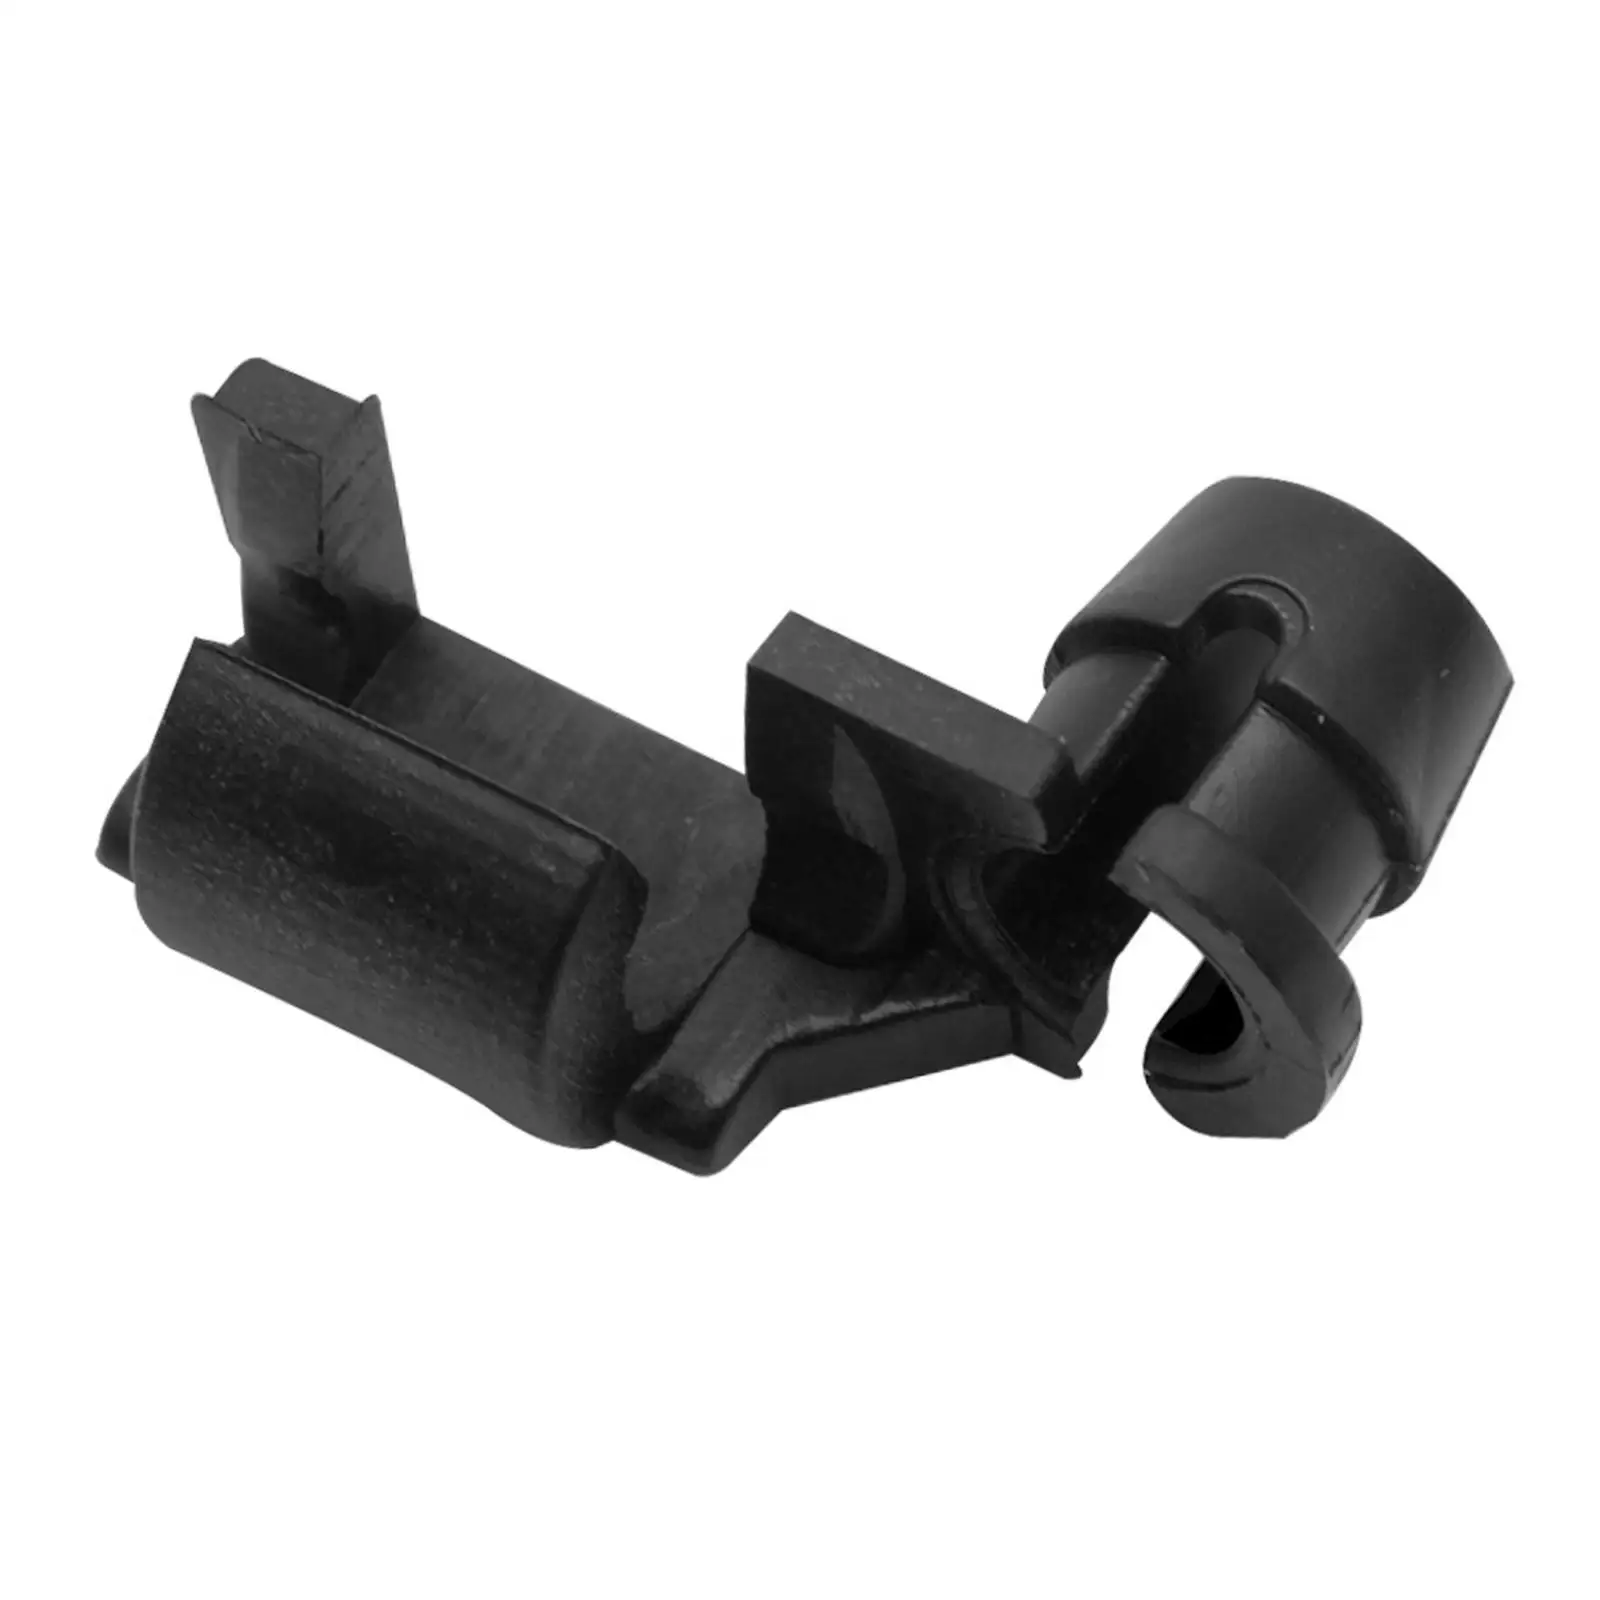 Joint Link 6E9-41237-00 for Yamaha Outboard Engine Black Easily Install